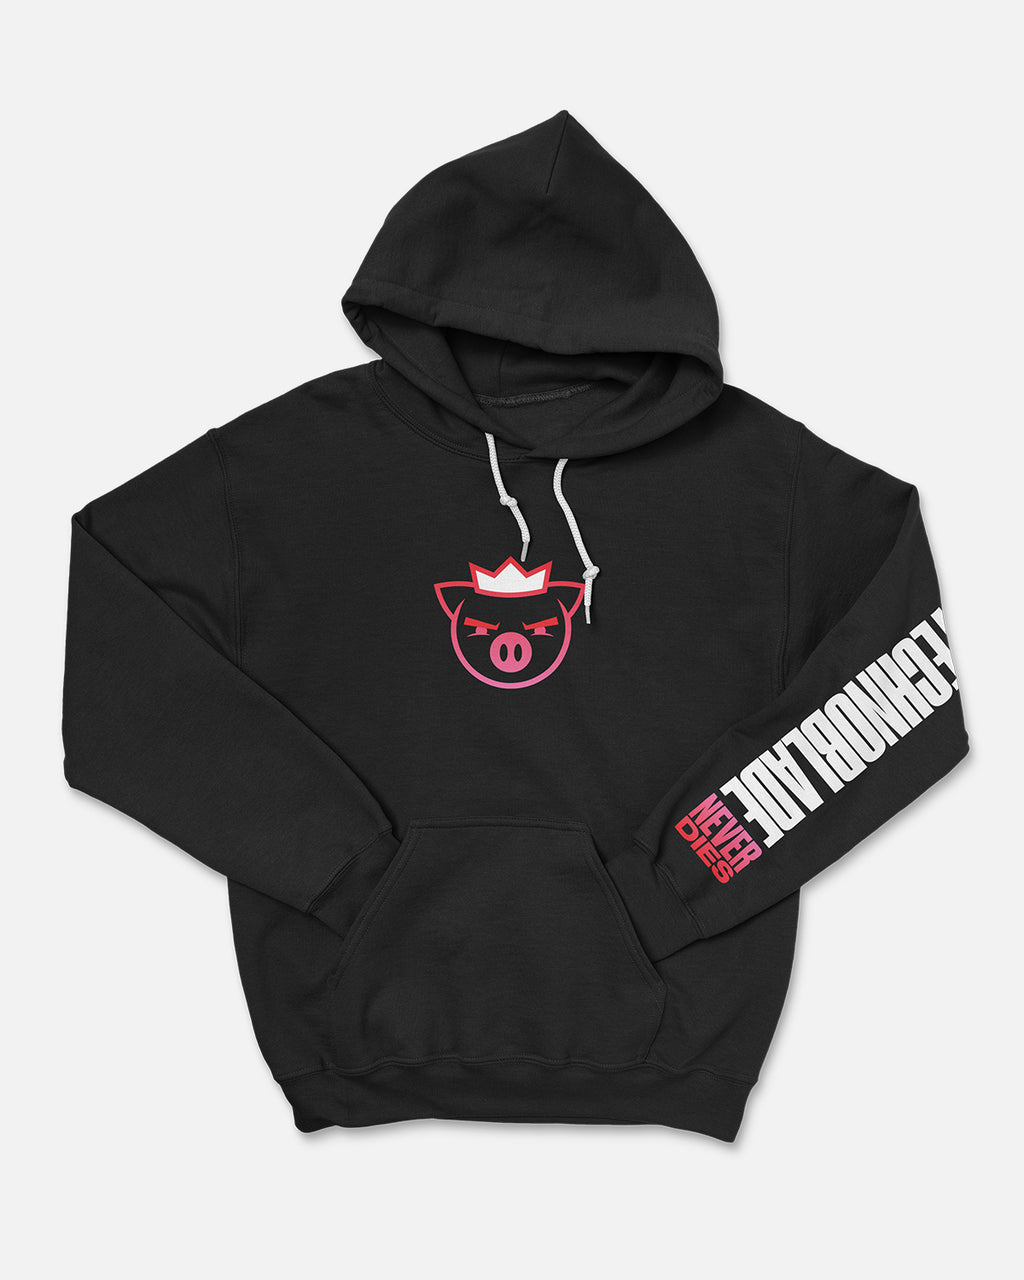 Technoblade never dies - Technoblade merch - Dream SMP Merch Adult  Pull-Over Hoodie by TeamDzShirts - Pixels